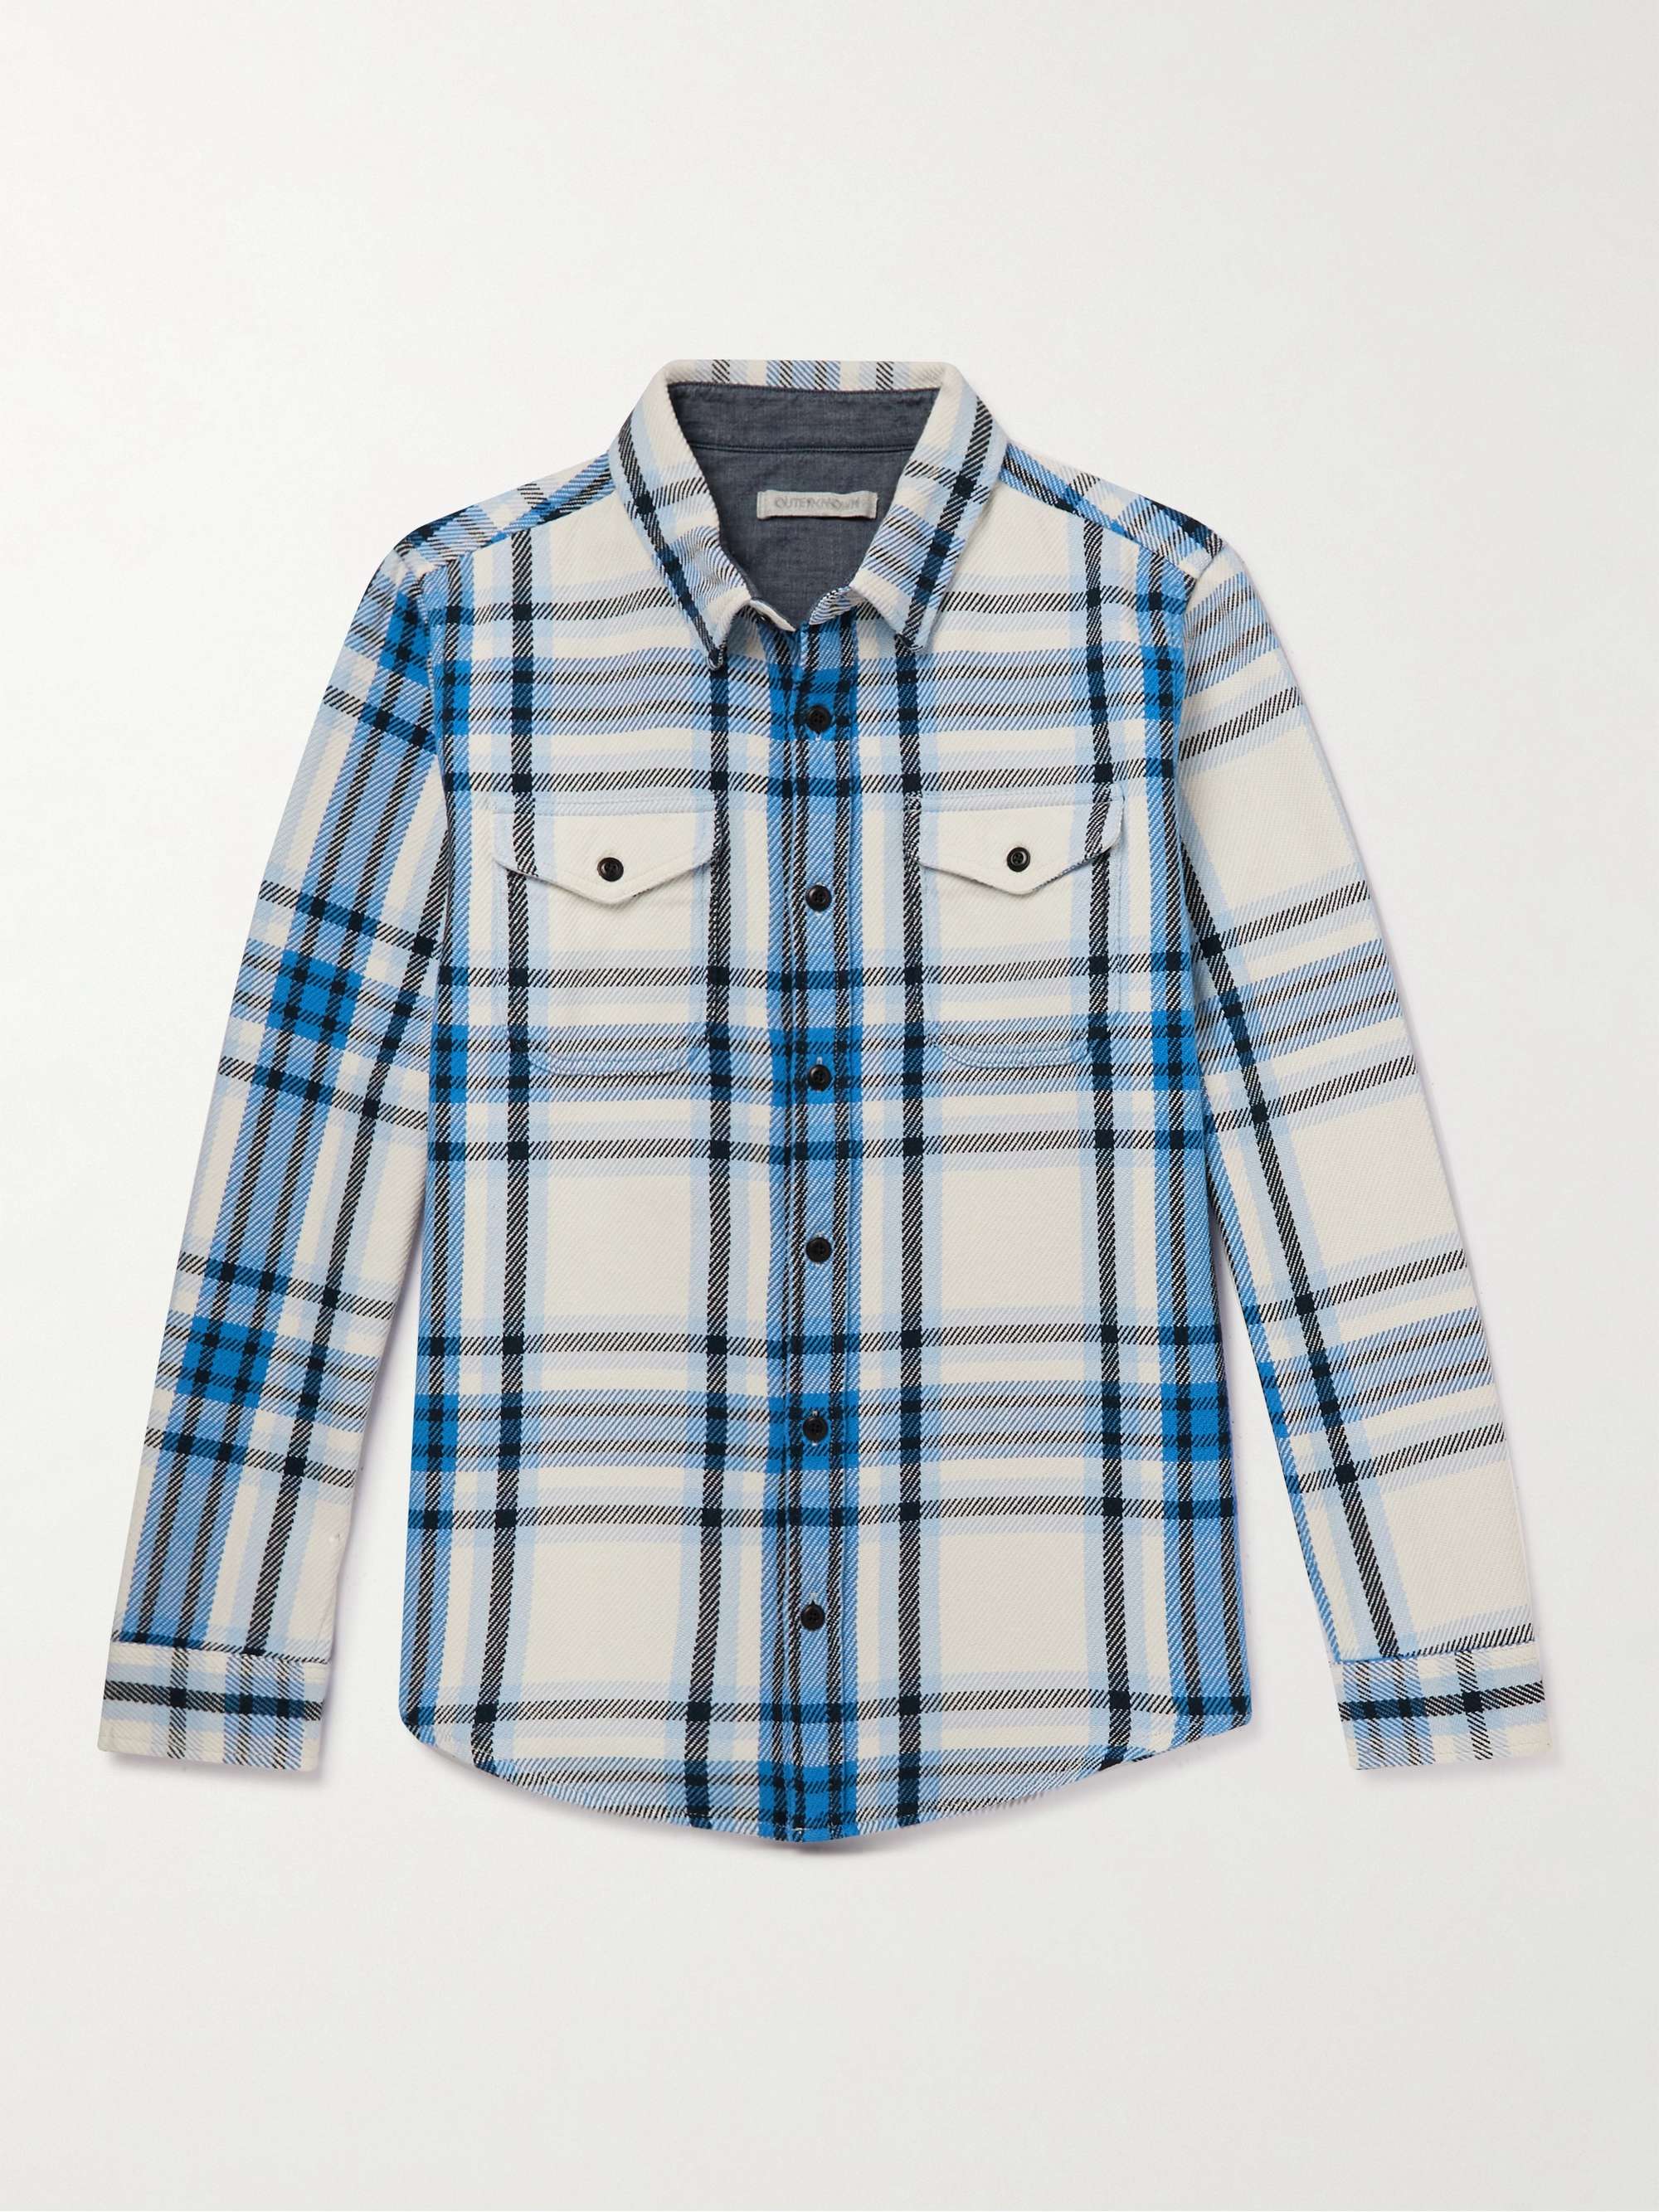 OUTERKNOWN Blanket Checked Organic Cotton-Twill Shirt | MR PORTER